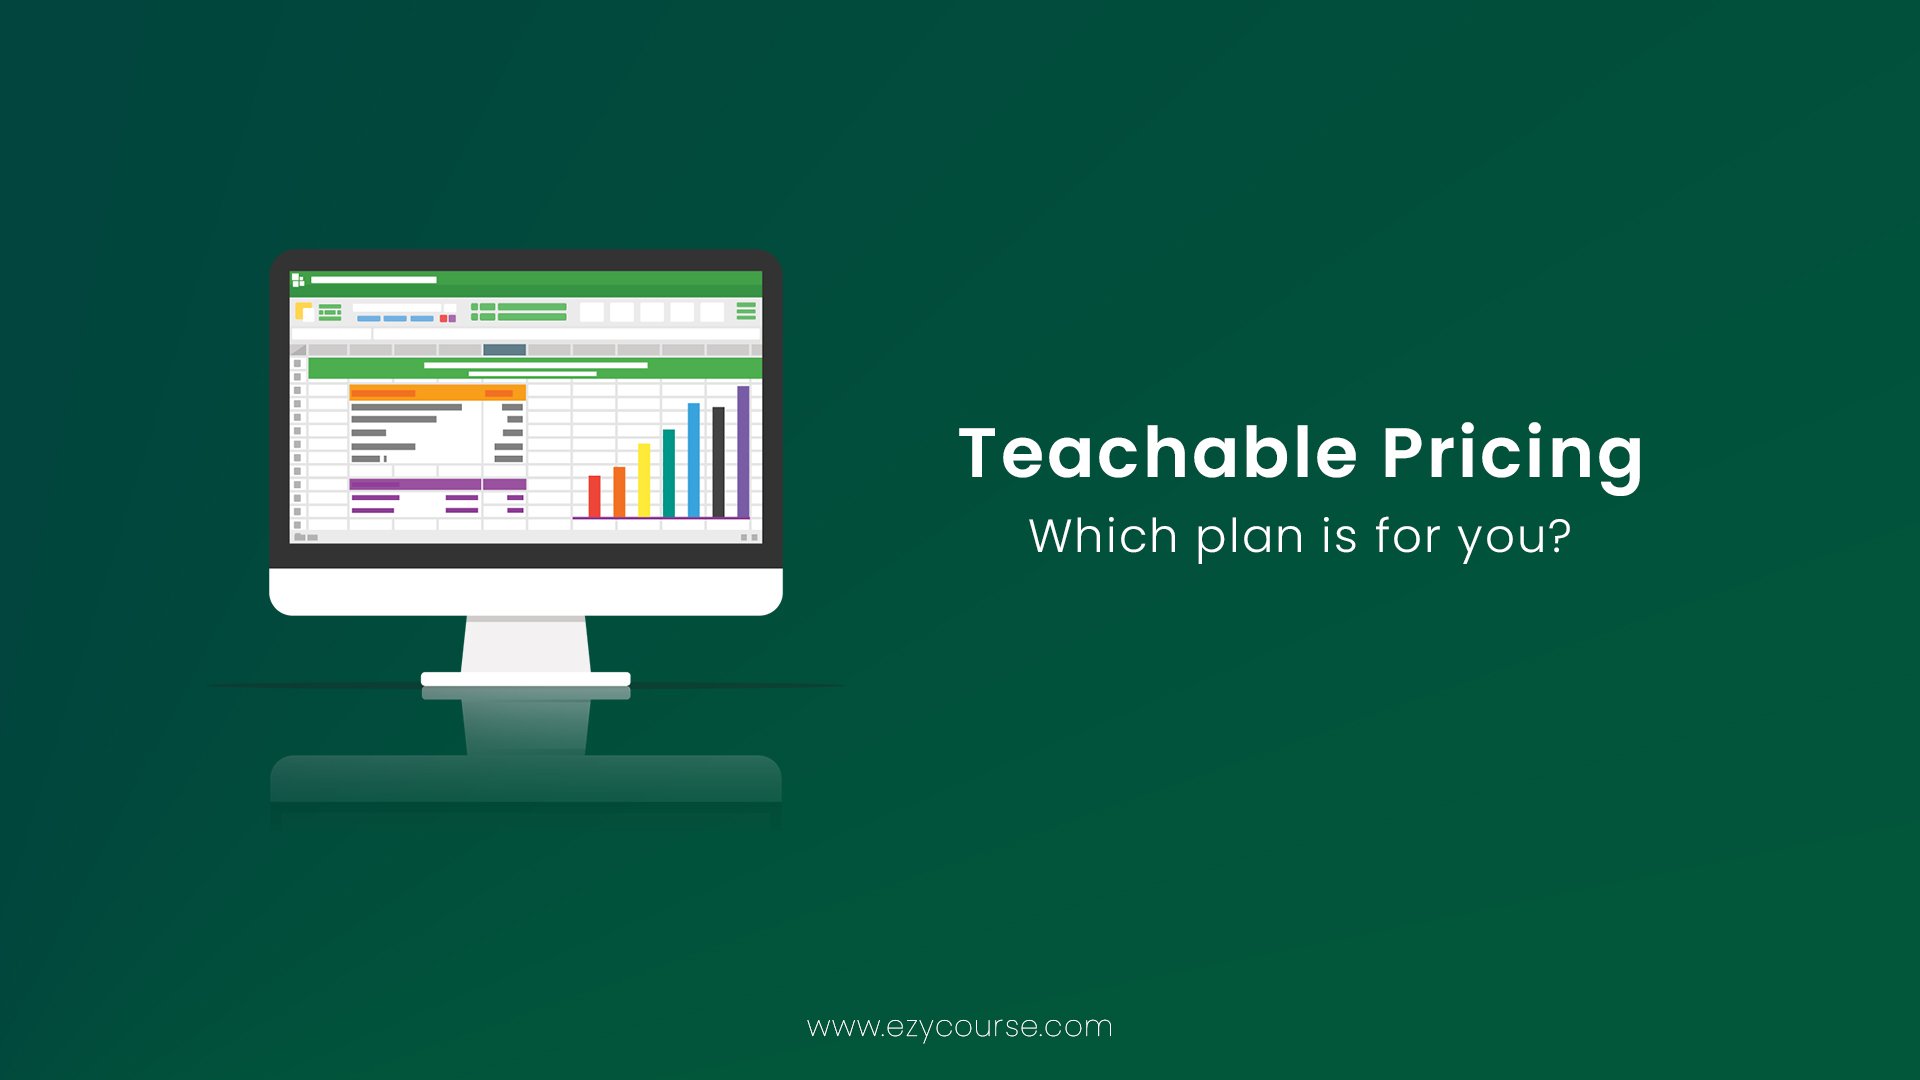 Teachable Pricing: Which plan is for you?